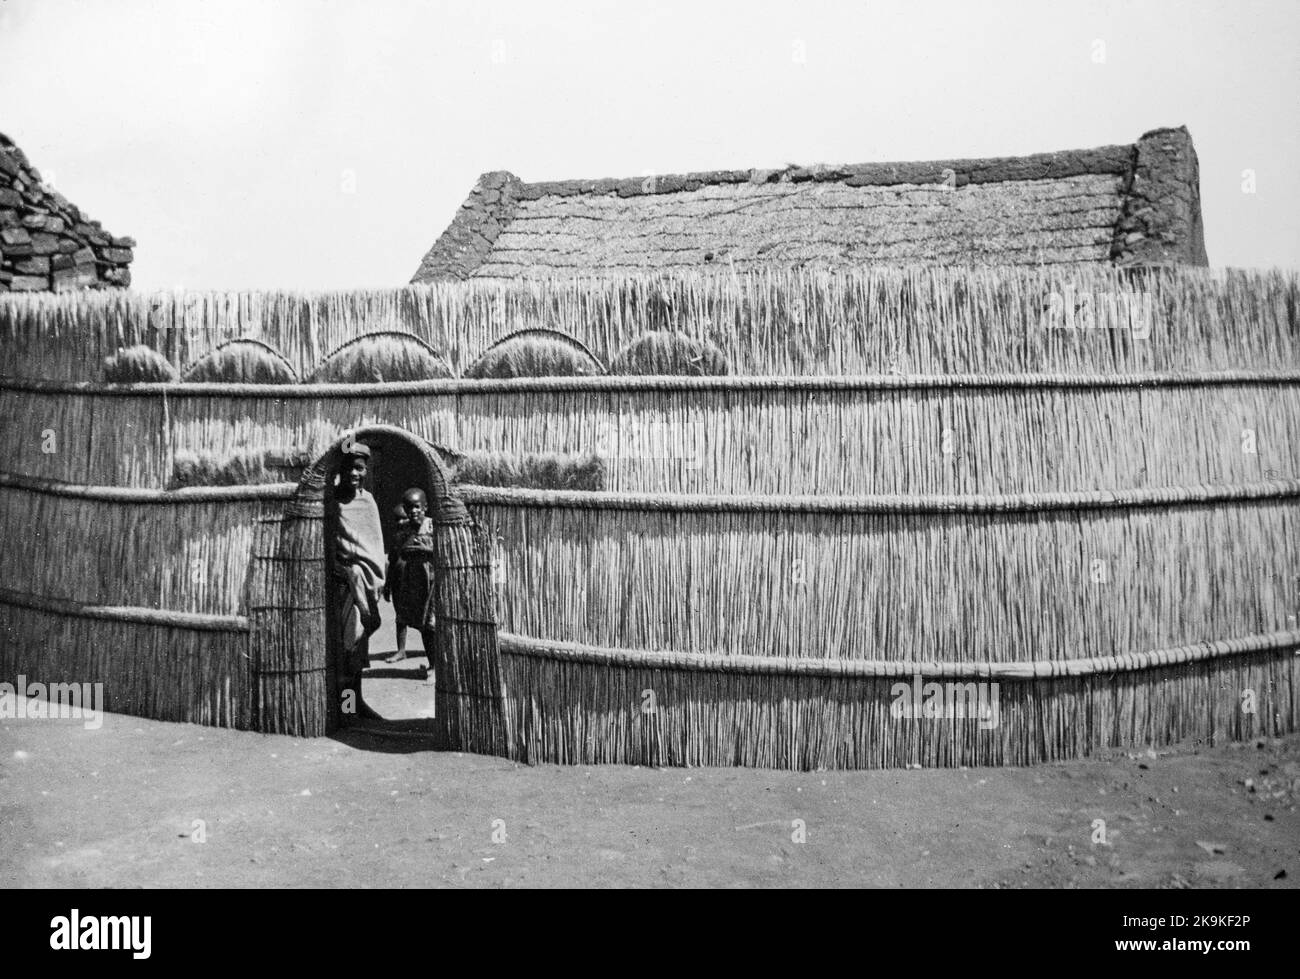 Photograph taken during The Boer War showing a fenced hut belonging to members of the Basotho Tribe, or Basuto Tribe, in Southern Africa. Stock Photo